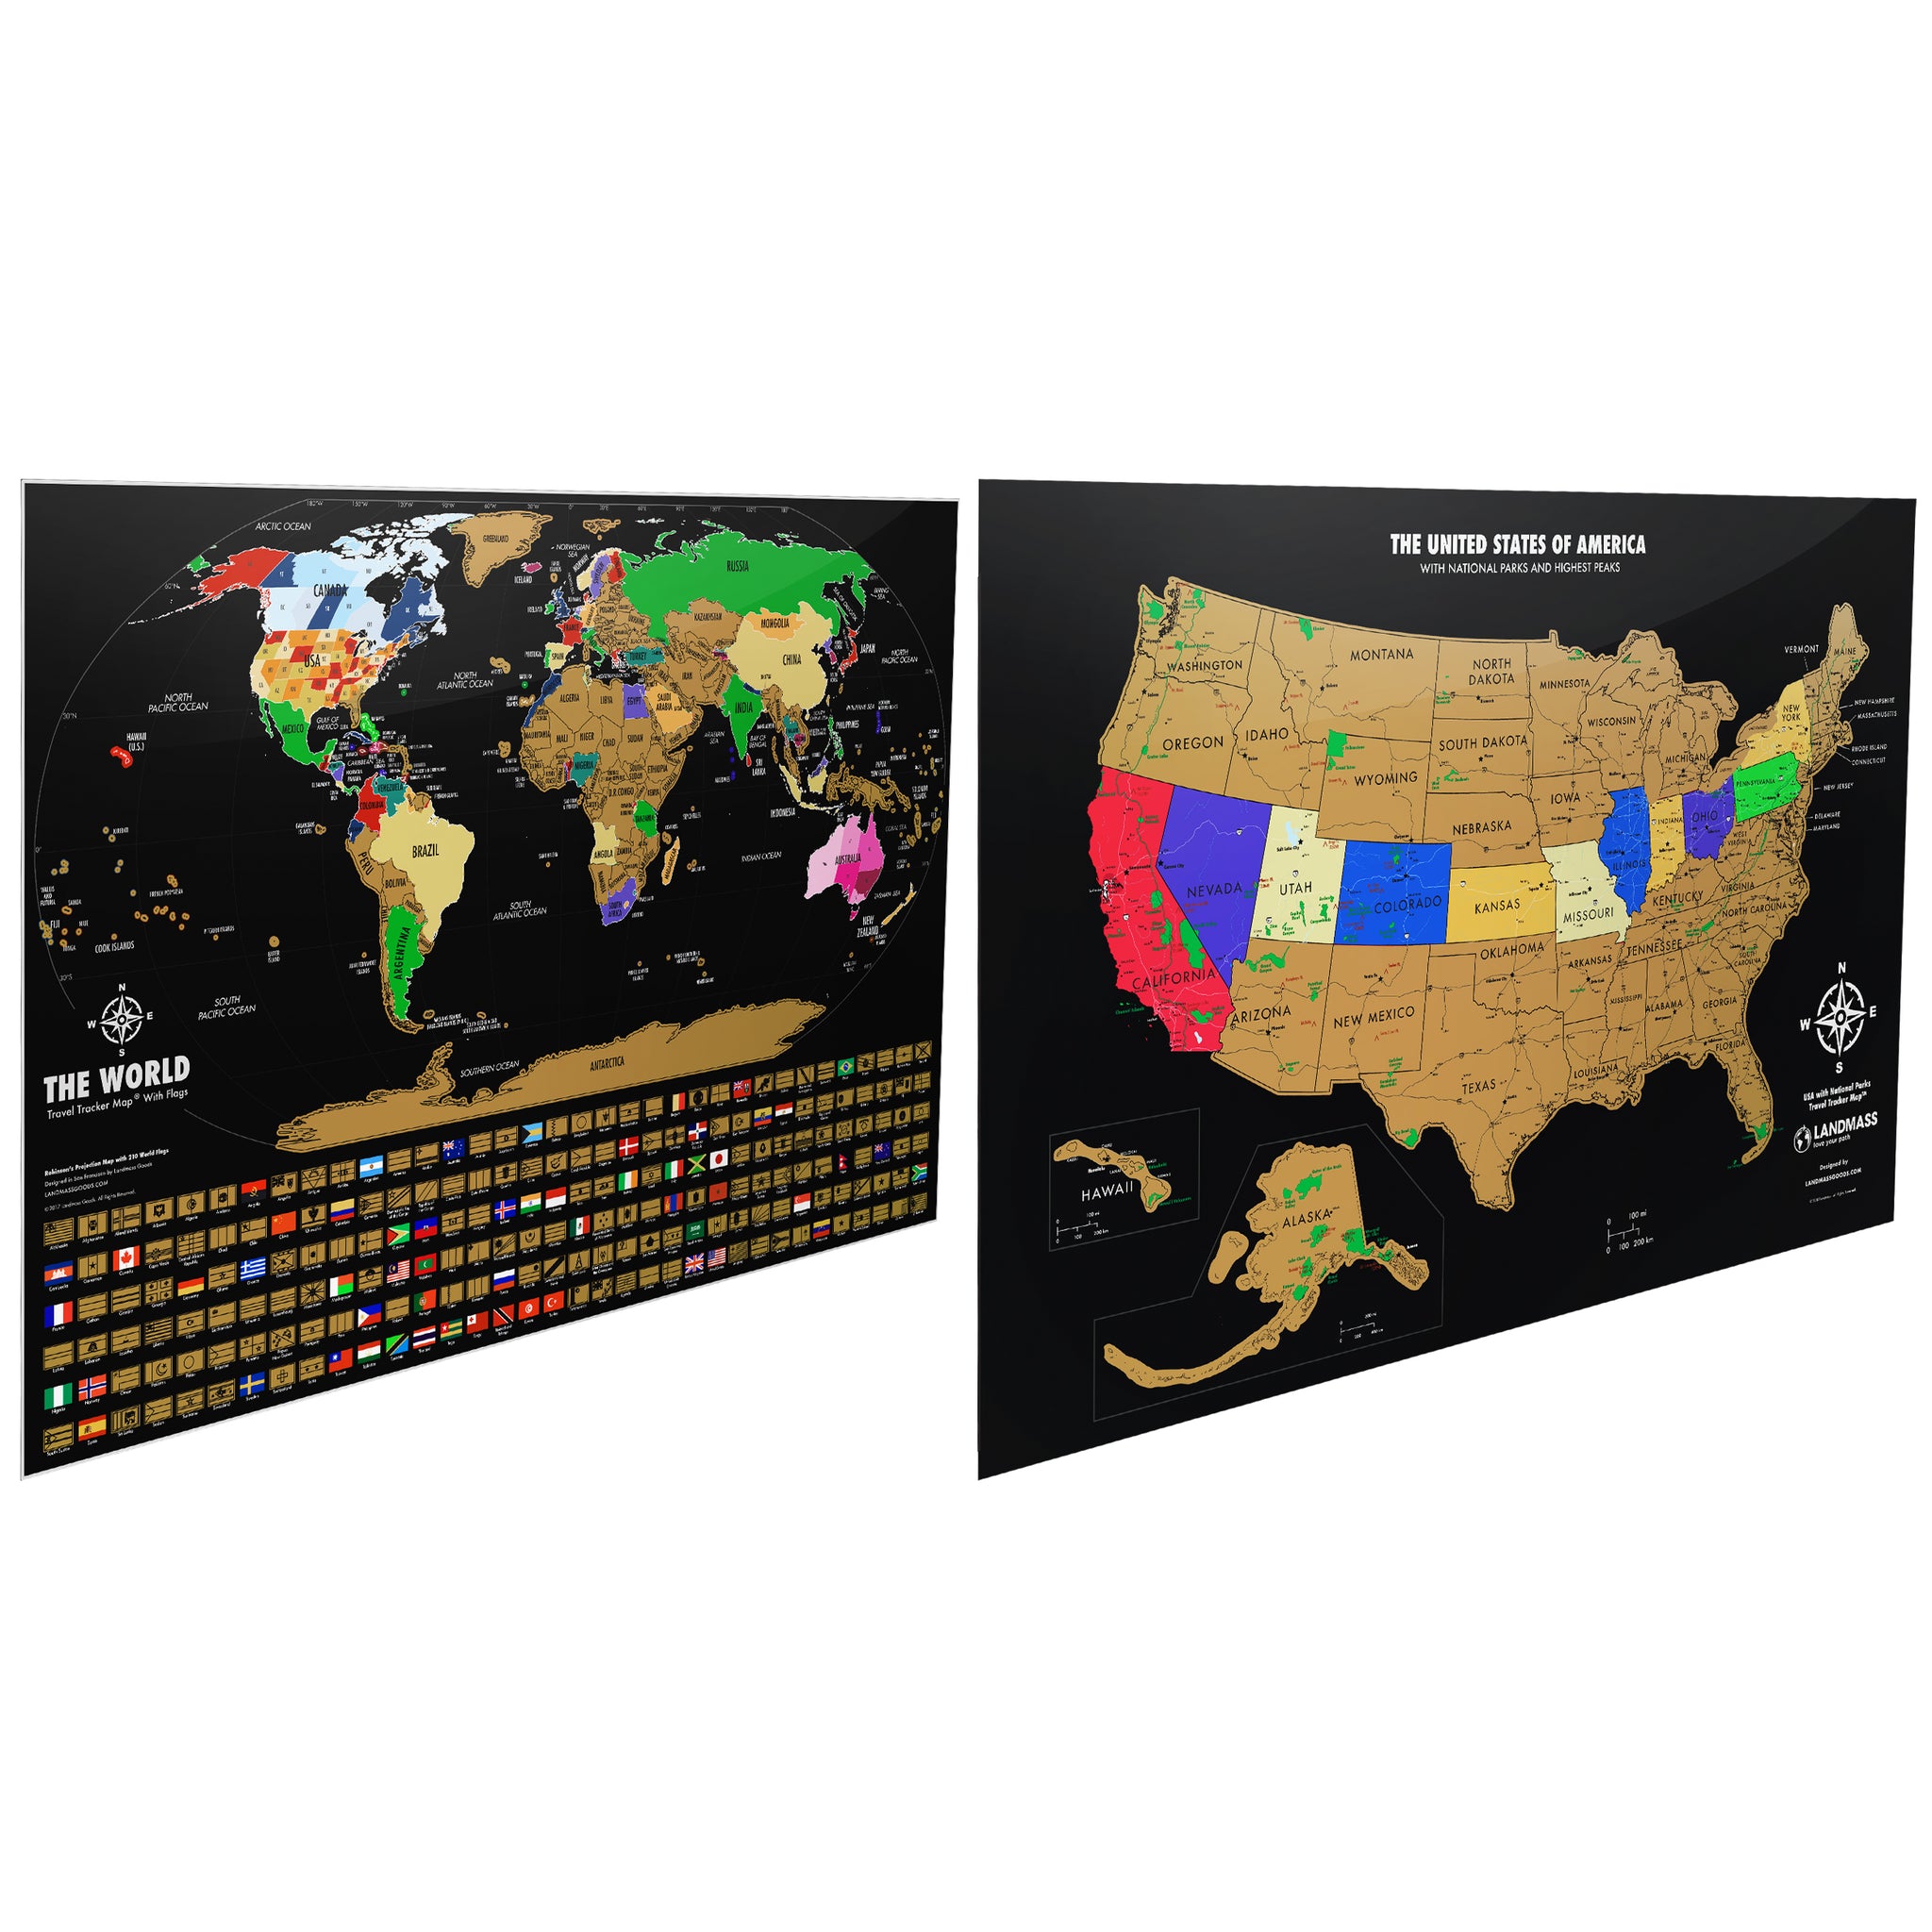 Scratch Off Maps of World and USA - Best for Travelers – Landmass